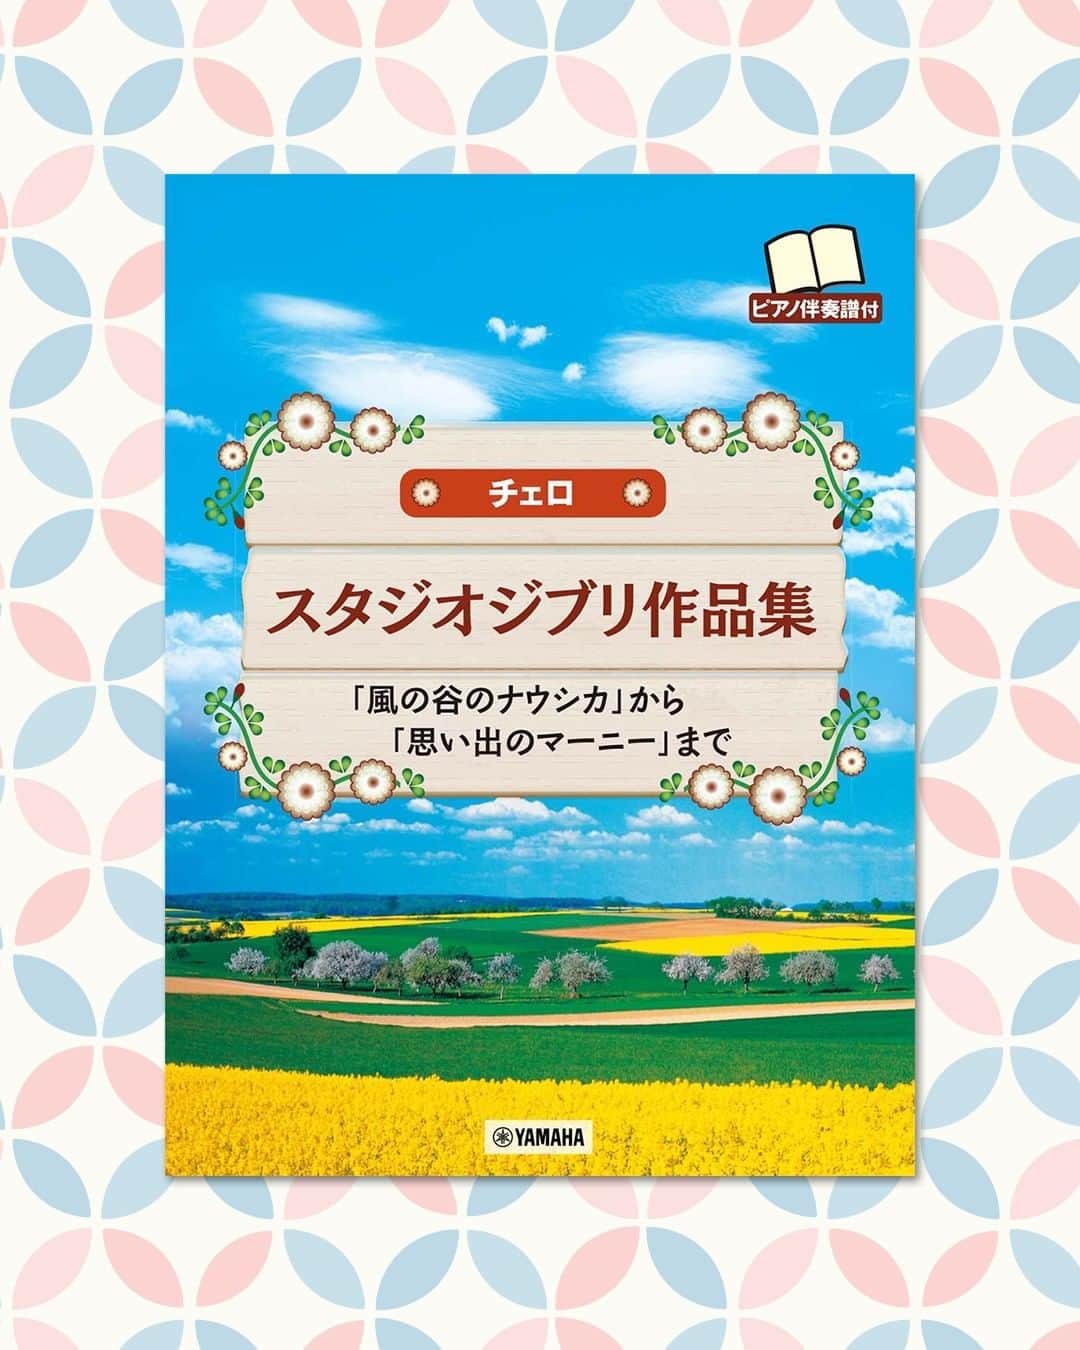 Wasabi Sheet Musicのインスタグラム：「{ Studio Ghibli Collection Cello with Piano accompaniment(Intermediate) Sheet Music Book } { チェロ　スタジオジブリ作品集　【ピアノ伴奏譜付】　「風の谷のナウシカ」から「思い出のマーニー」まで }  『風の谷のナウシカ』から『思い出のマーニー』まで収載した全30曲。ピアノ伴奏譜付きですので、コンサートやパーティーなどでも使えるオススメの曲集です。  @WasabiSheetMusic are selling Japanese sheet music. Ship from Japan to all over the world!  #Cello #Cellos #Cellolife #Celloplayer #Cellosolo #Cellolove #Cello #Cellist #Celloer #Cellopractice #StudioGhibli #Ghibli #GhibliSongs #StudioGhibliSongs #SheetMusic #MusicBook #noten #notenbuch」